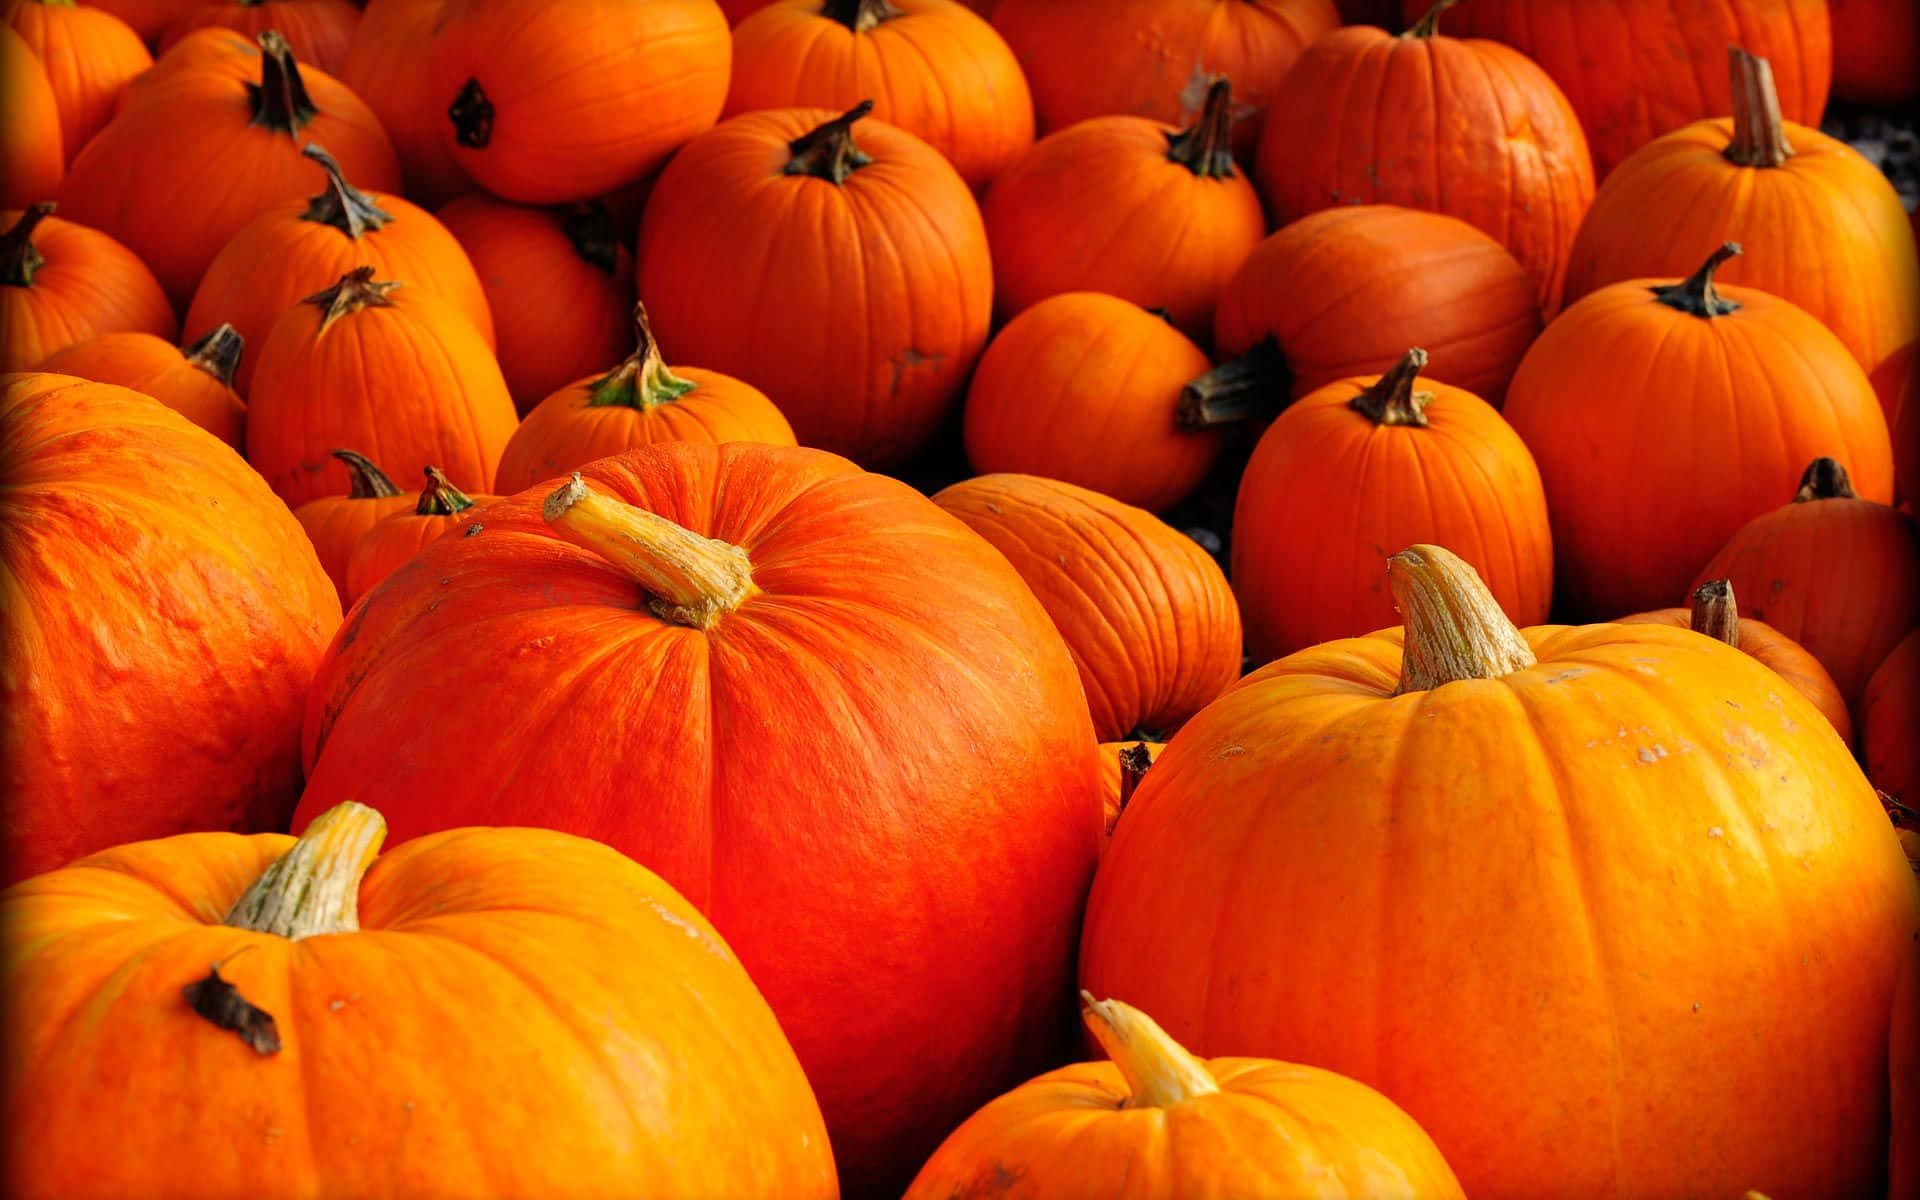 Halloween is coming! Spiced up your celebration with a big pumpkin. Wallpaper